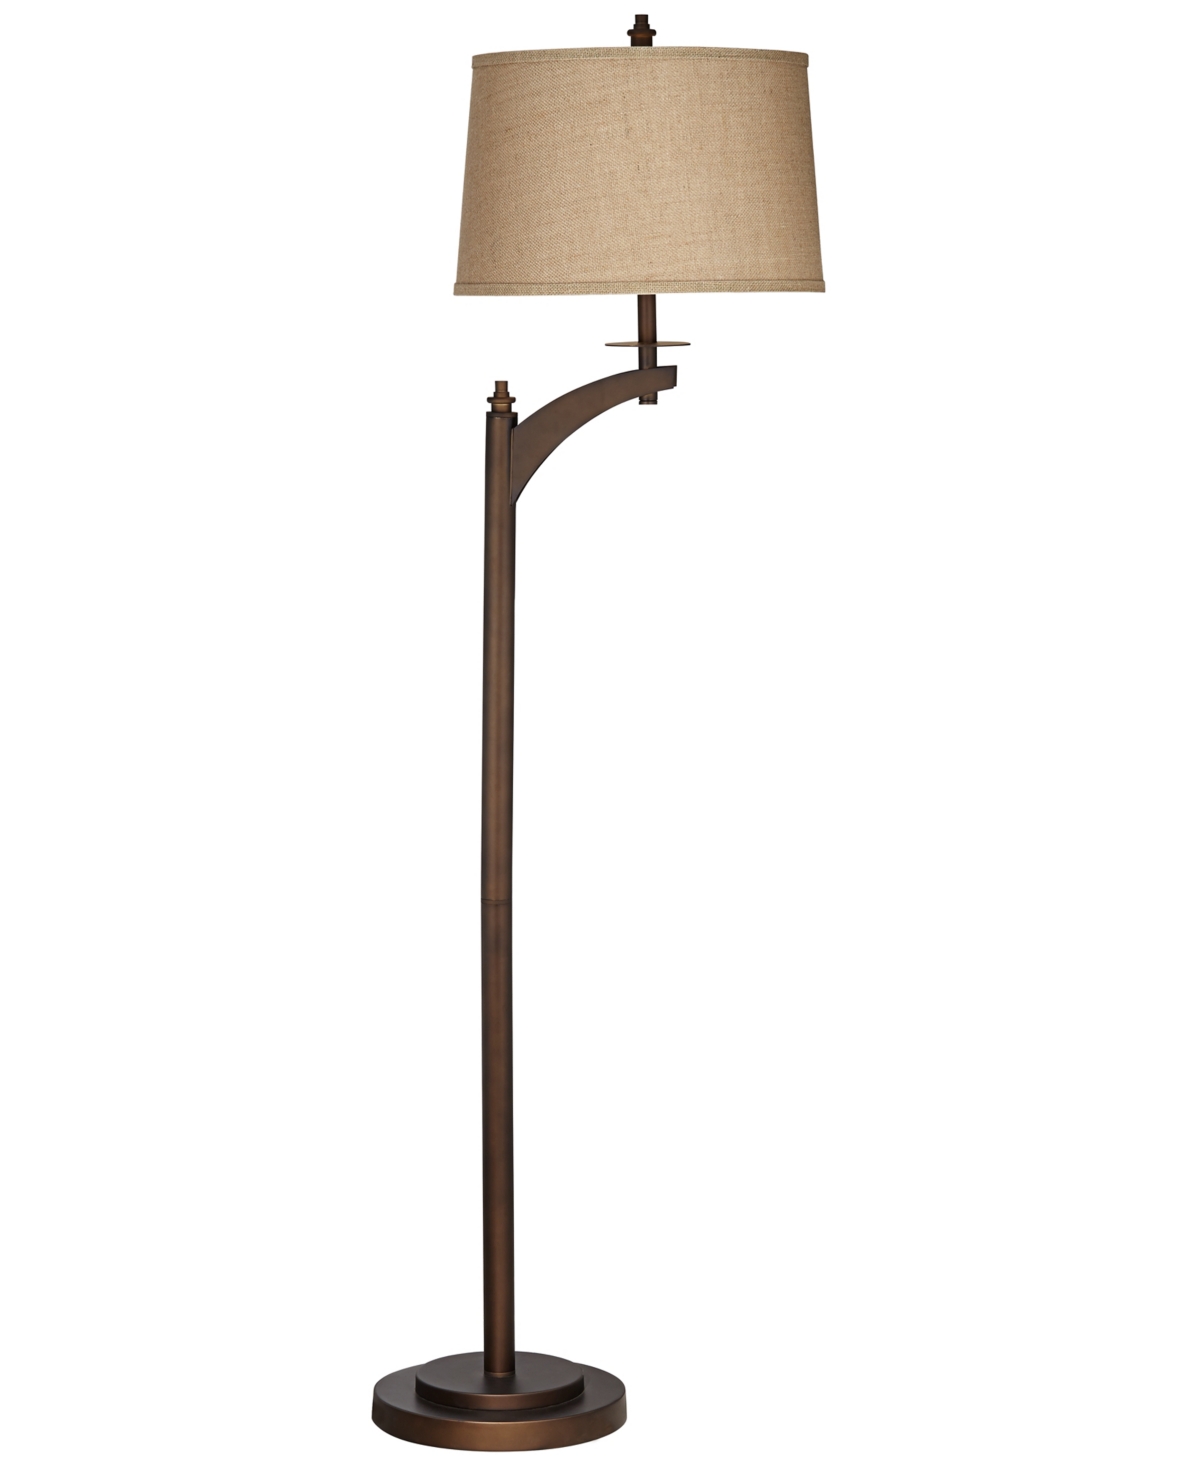 UPC 736101704317 product image for Pacific Coast Metal Floor Lamp with Arm in Bronze | upcitemdb.com